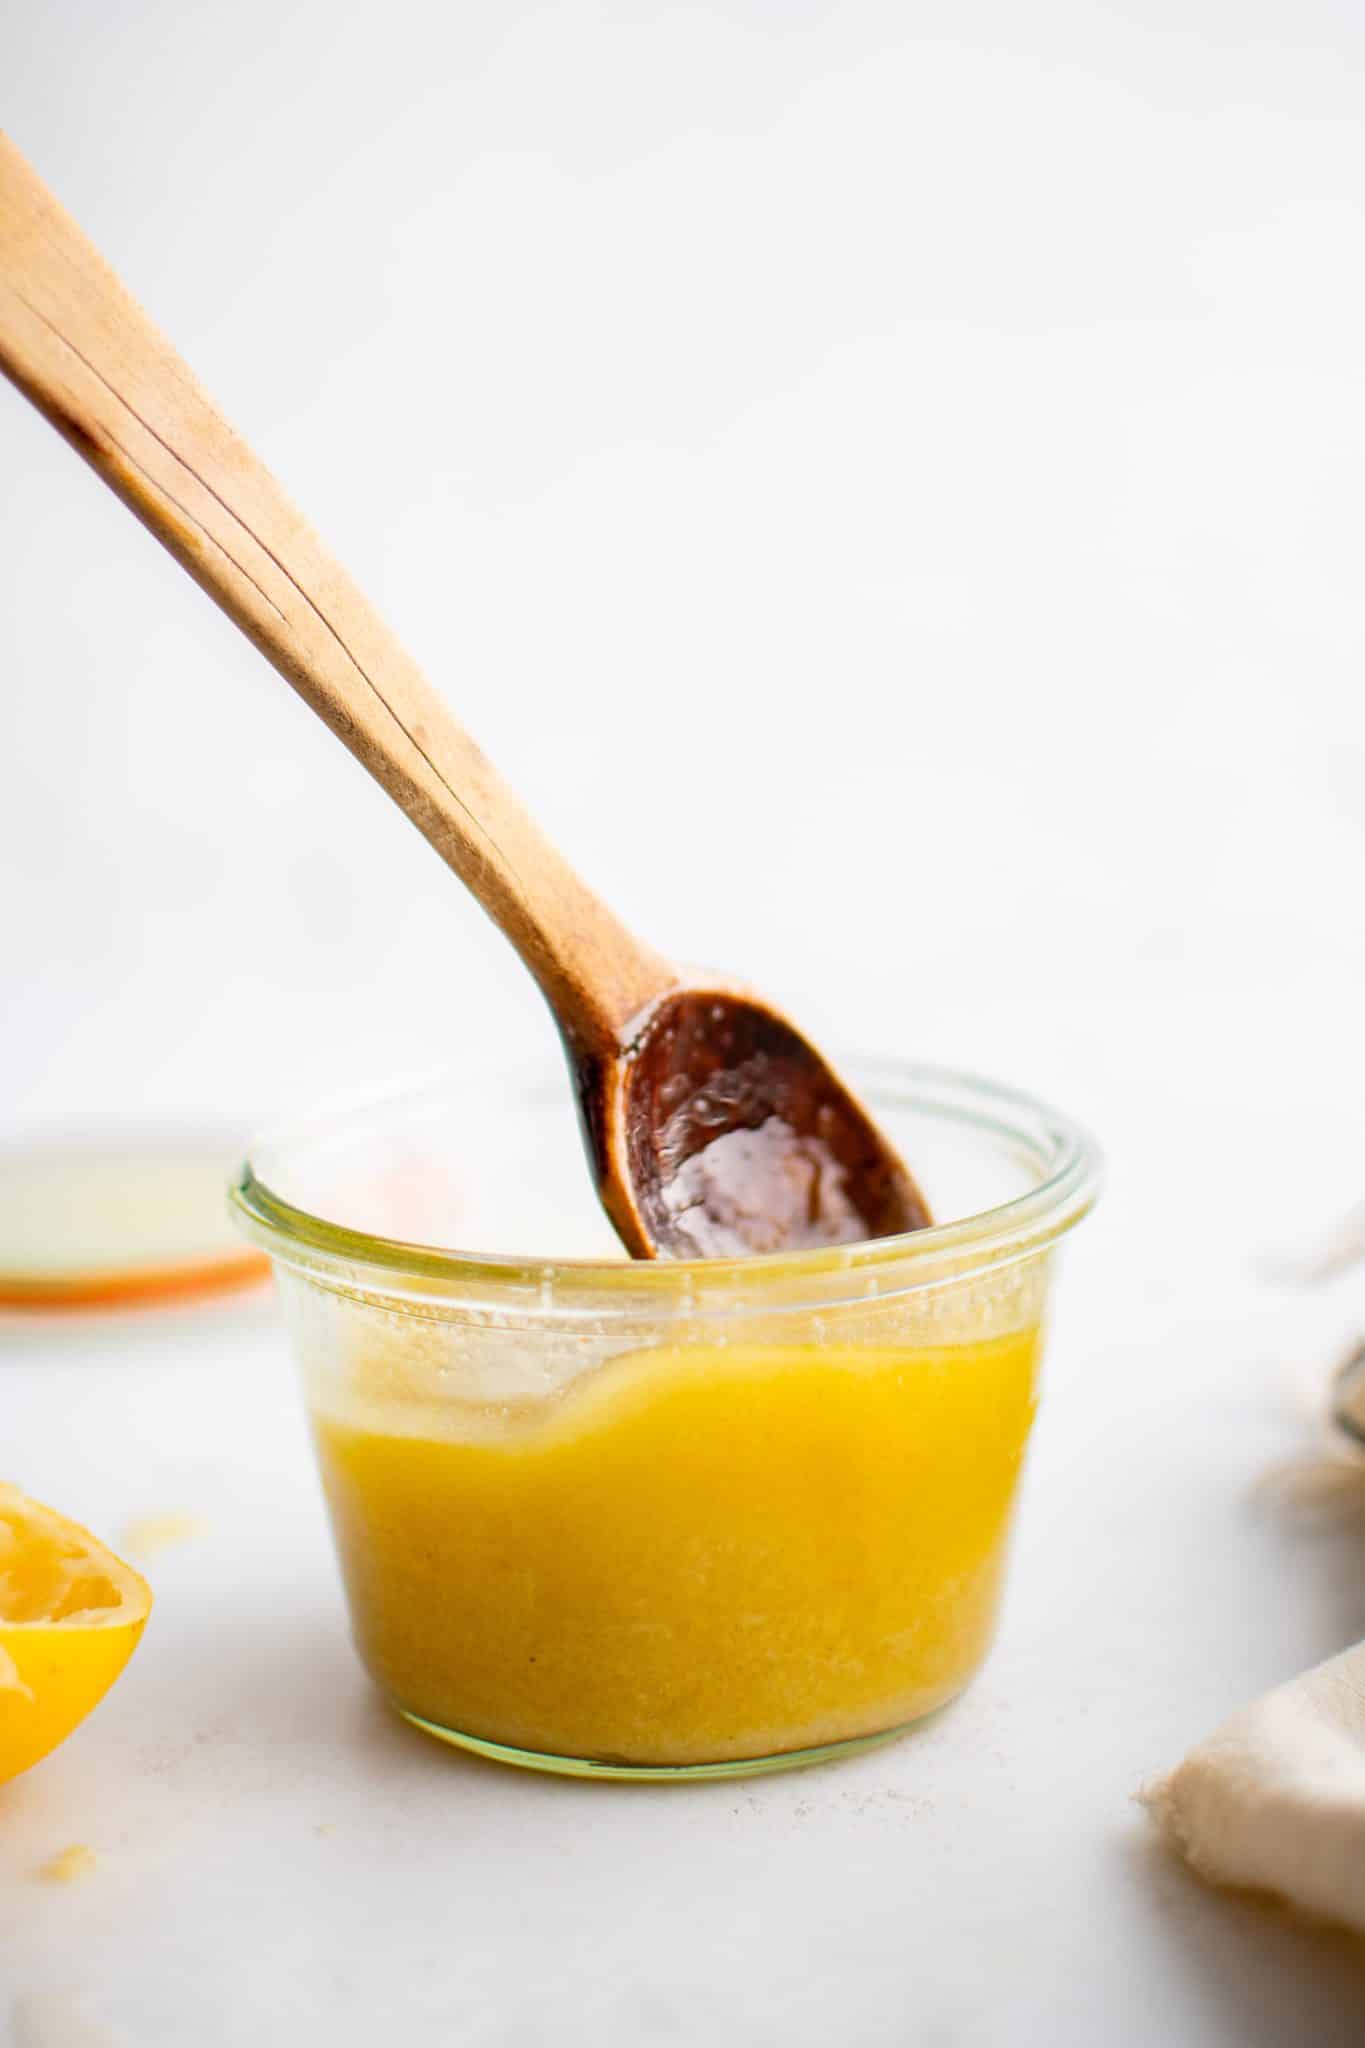 Small wooden spoon in a glass jar filled with golden yellow champagne vinaigrette.